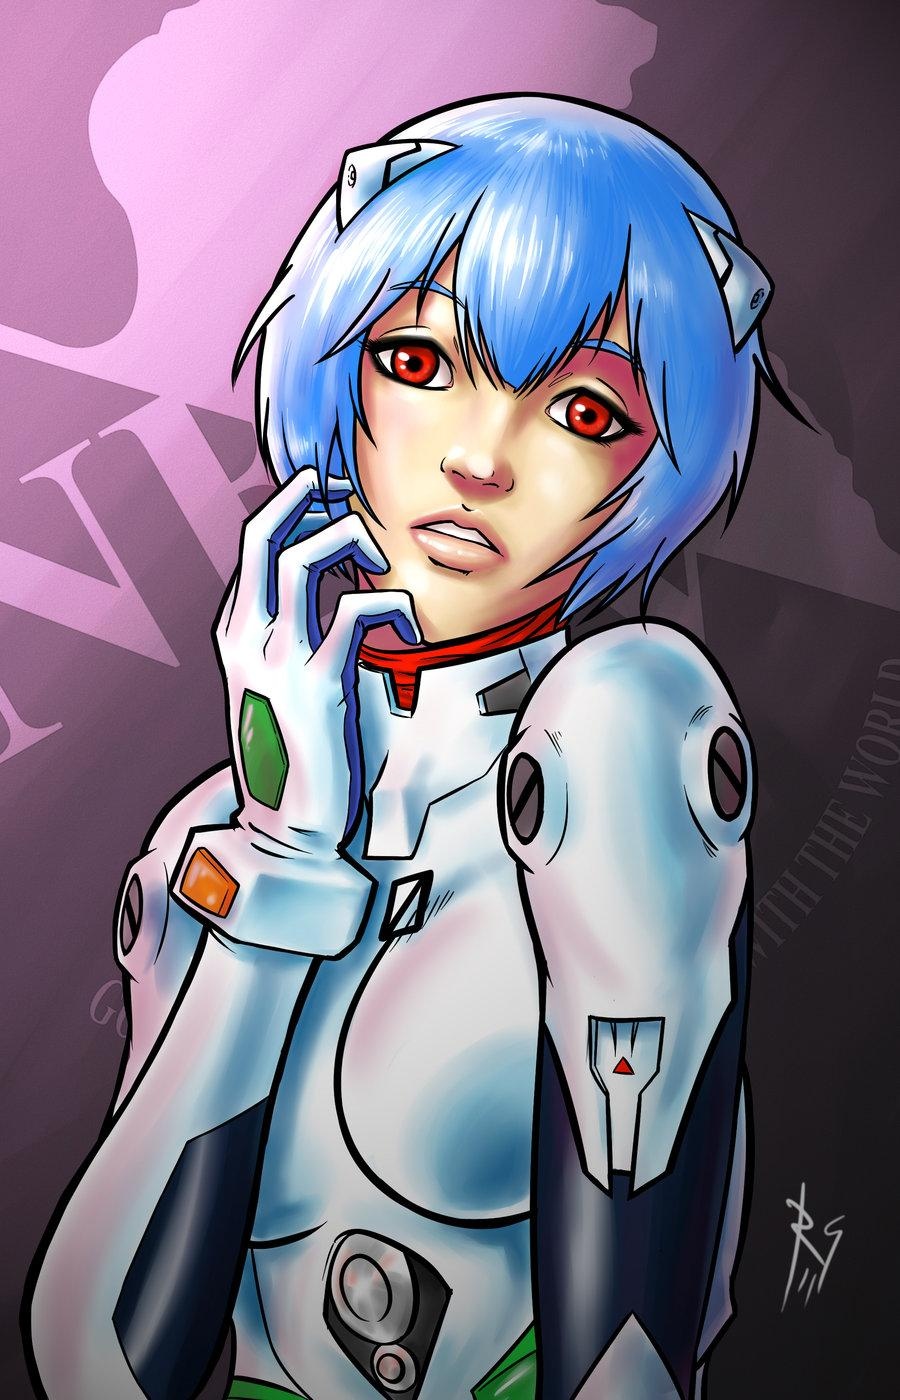 ayanami_rei_by_rodjer-d4ayhqy.jpg